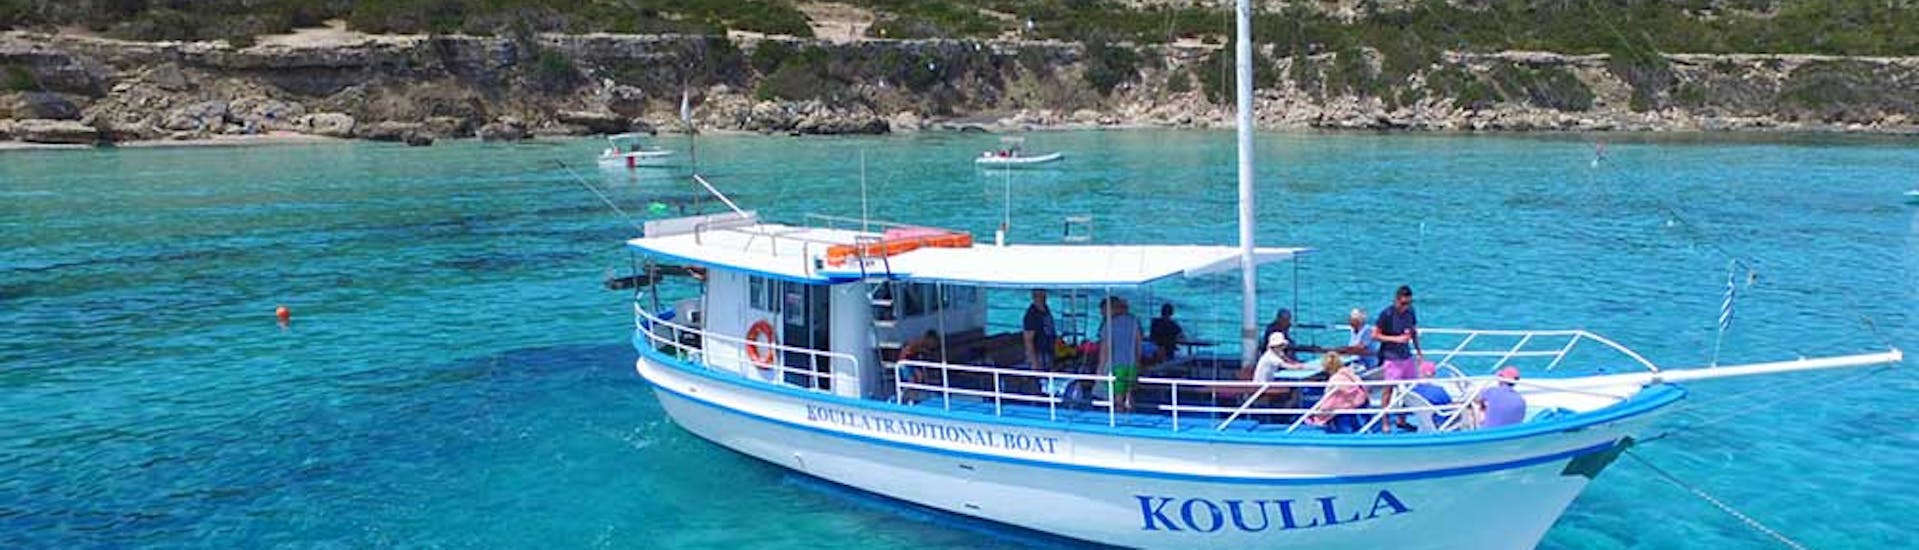 Passengers onboard the Koulla on the trip from Latchi to the Blue Lagoon with Cyprus Mini Cruises.